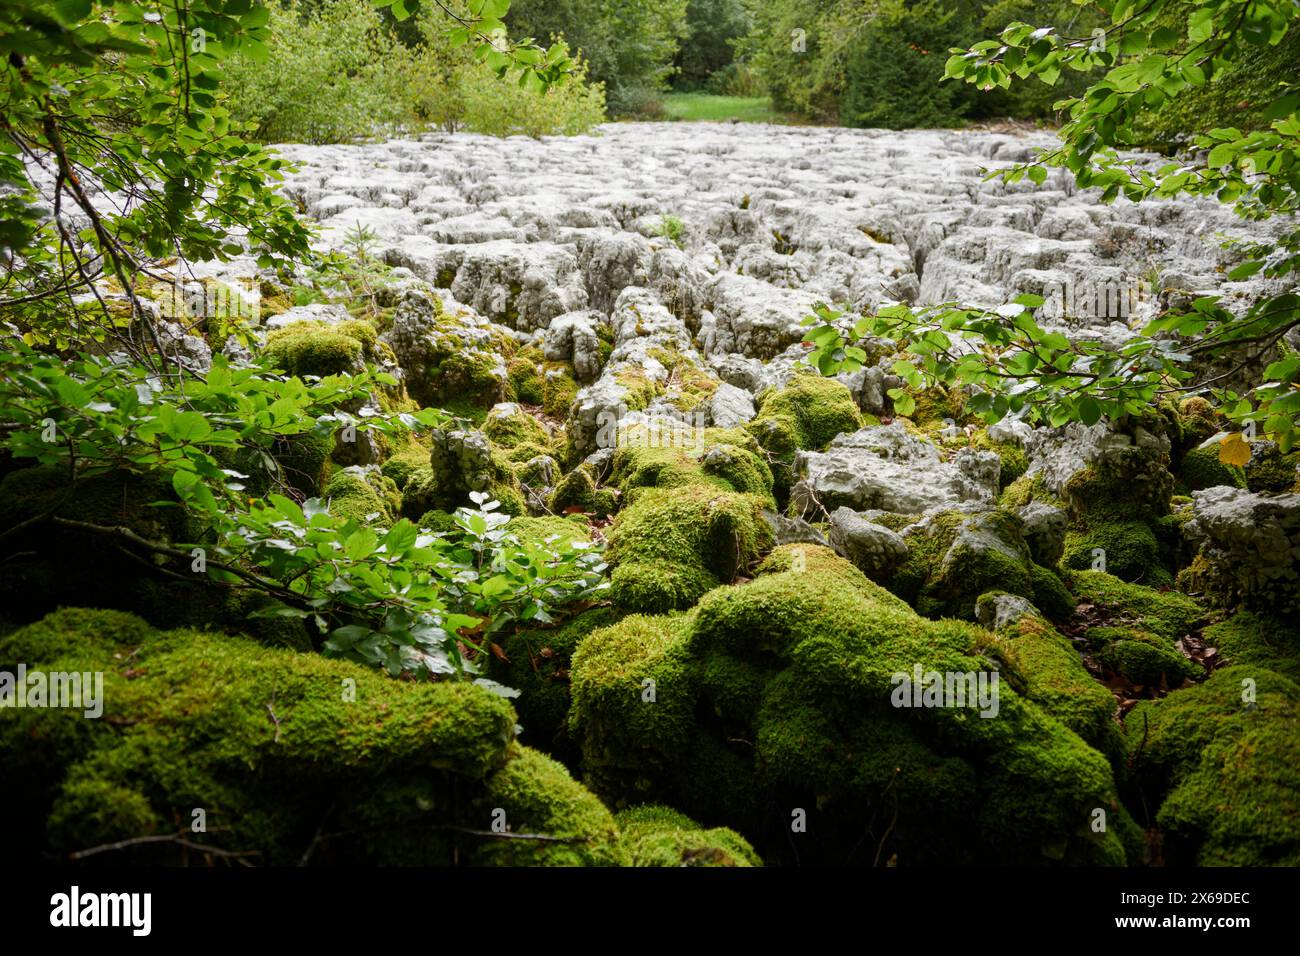 Forest, karst area, stone clearing Stock Photo